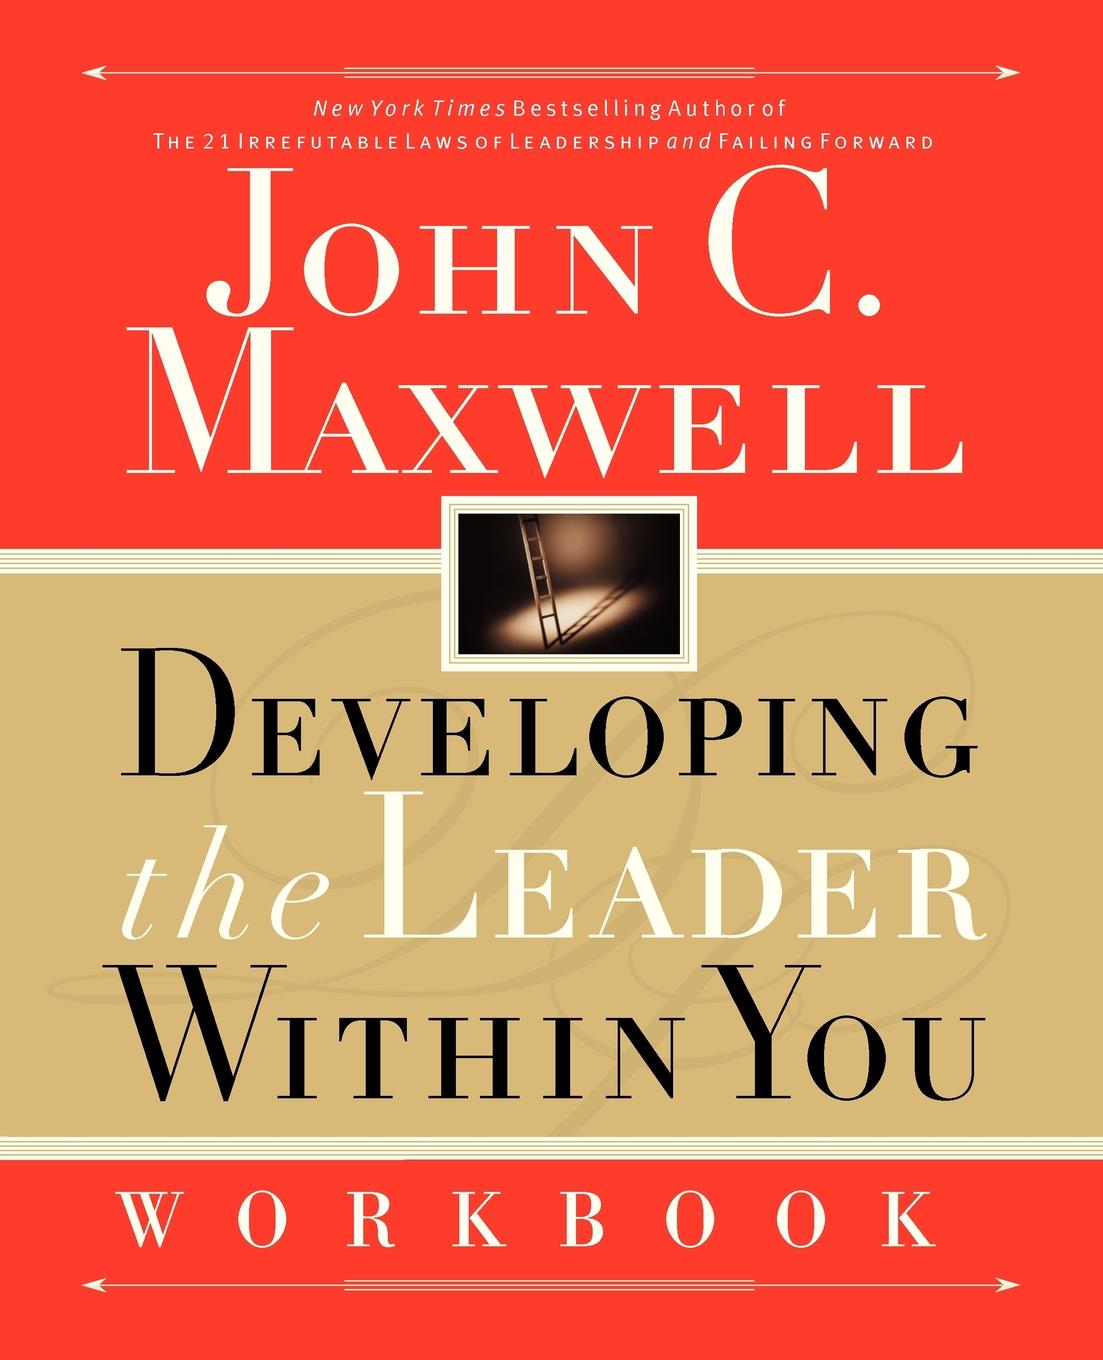 Developing the Leader Within You Workbook (Paperback) - image 1 of 1